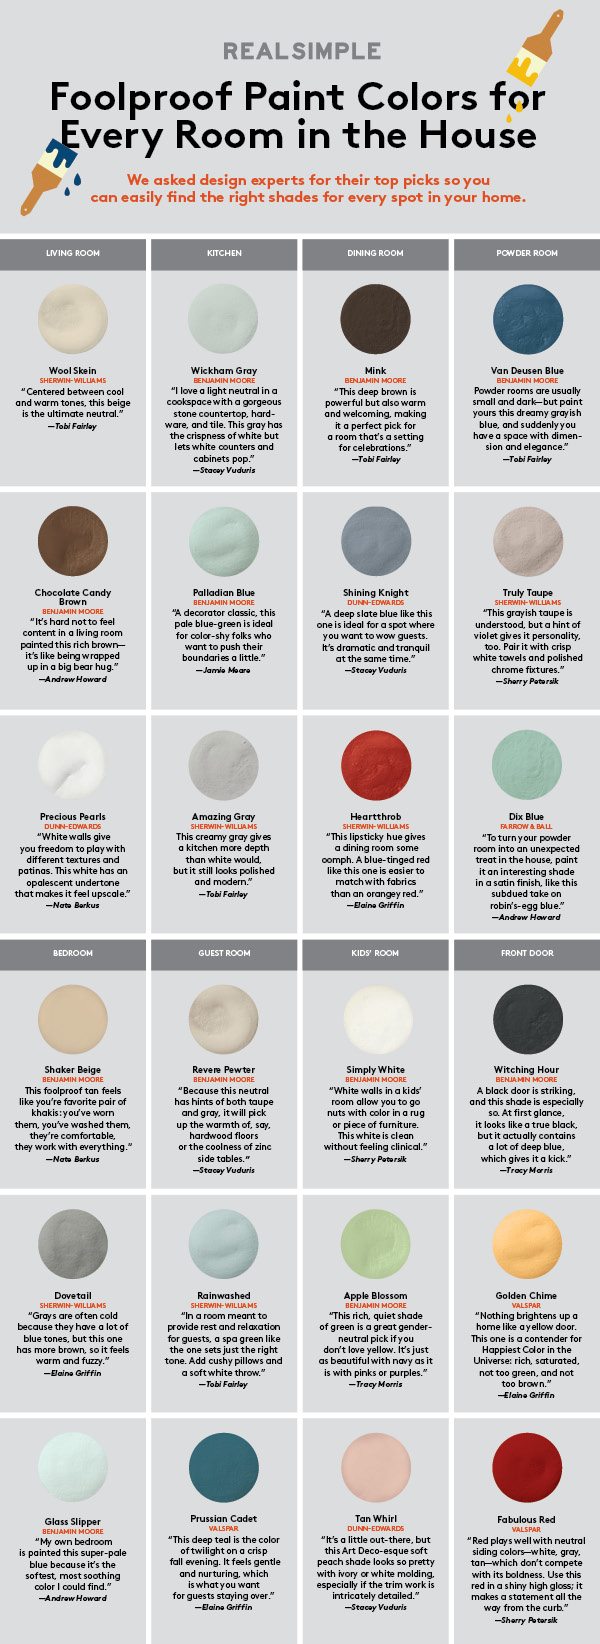 foolproof paint color schemes for your house